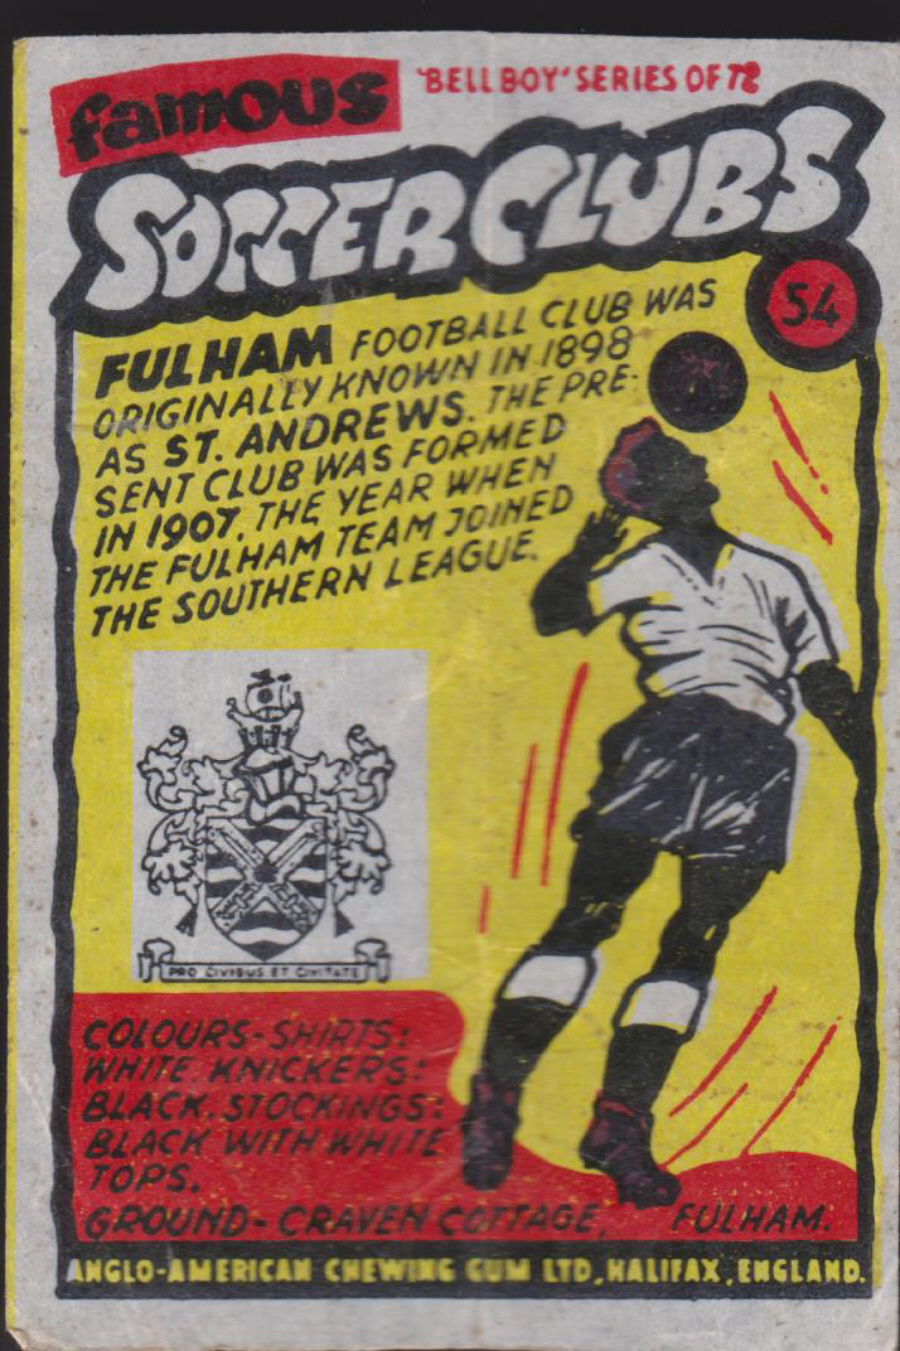 Anglo-American-Chewing-Gum-Wax-Wrapper-Famous-Soccer-Clubs-No-54 - Fulham - Click Image to Close